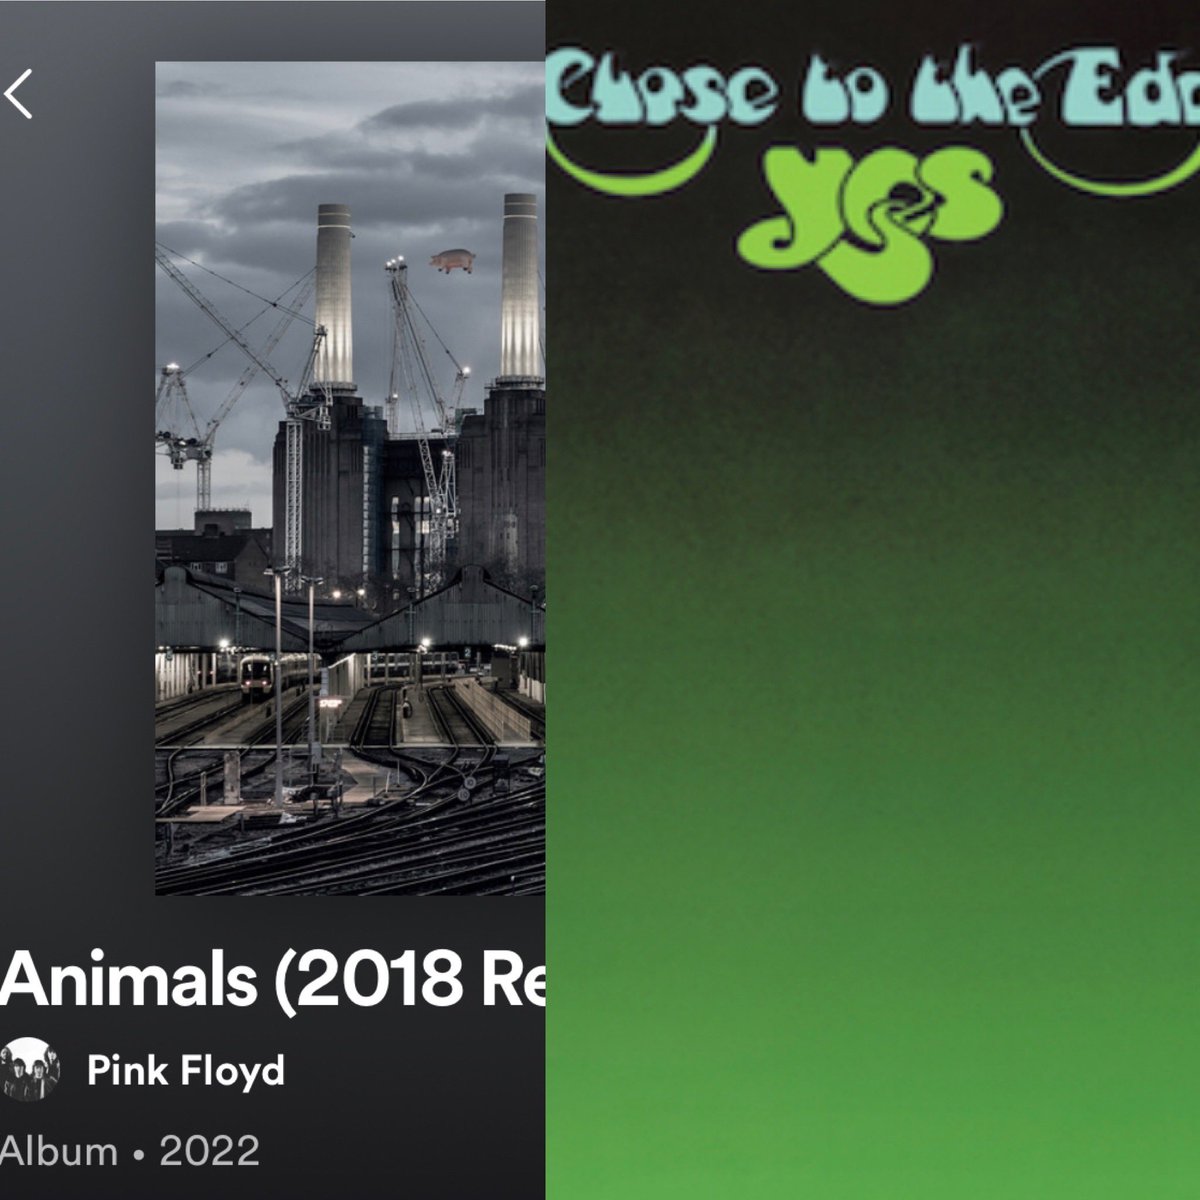 Music poll #2 - because yesterday’s was fun. These are my top 2 albums all time - PF’s Animals & Yes’ Close to the Edge. Sacred stuff 😮‍💨Where do these fit in your all time playlist and what are your top 2? #musicpoll